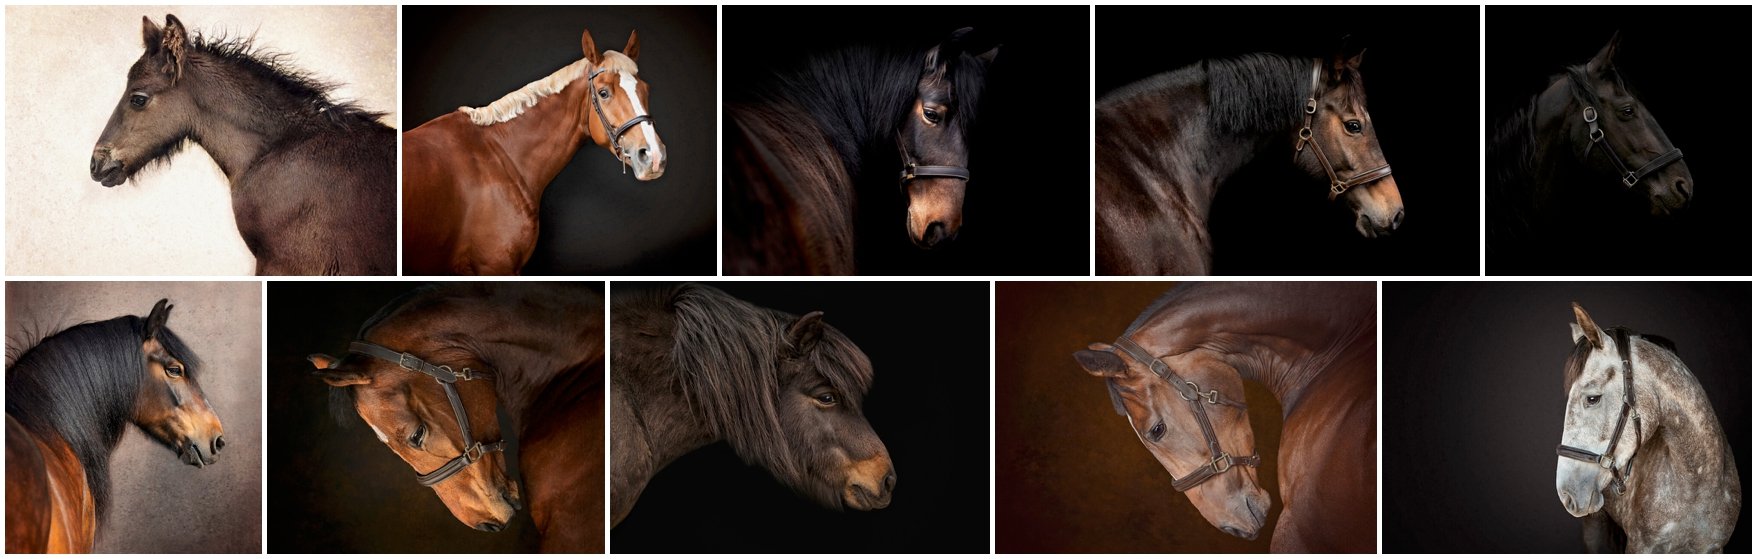 The evloution of an equine photographer's work